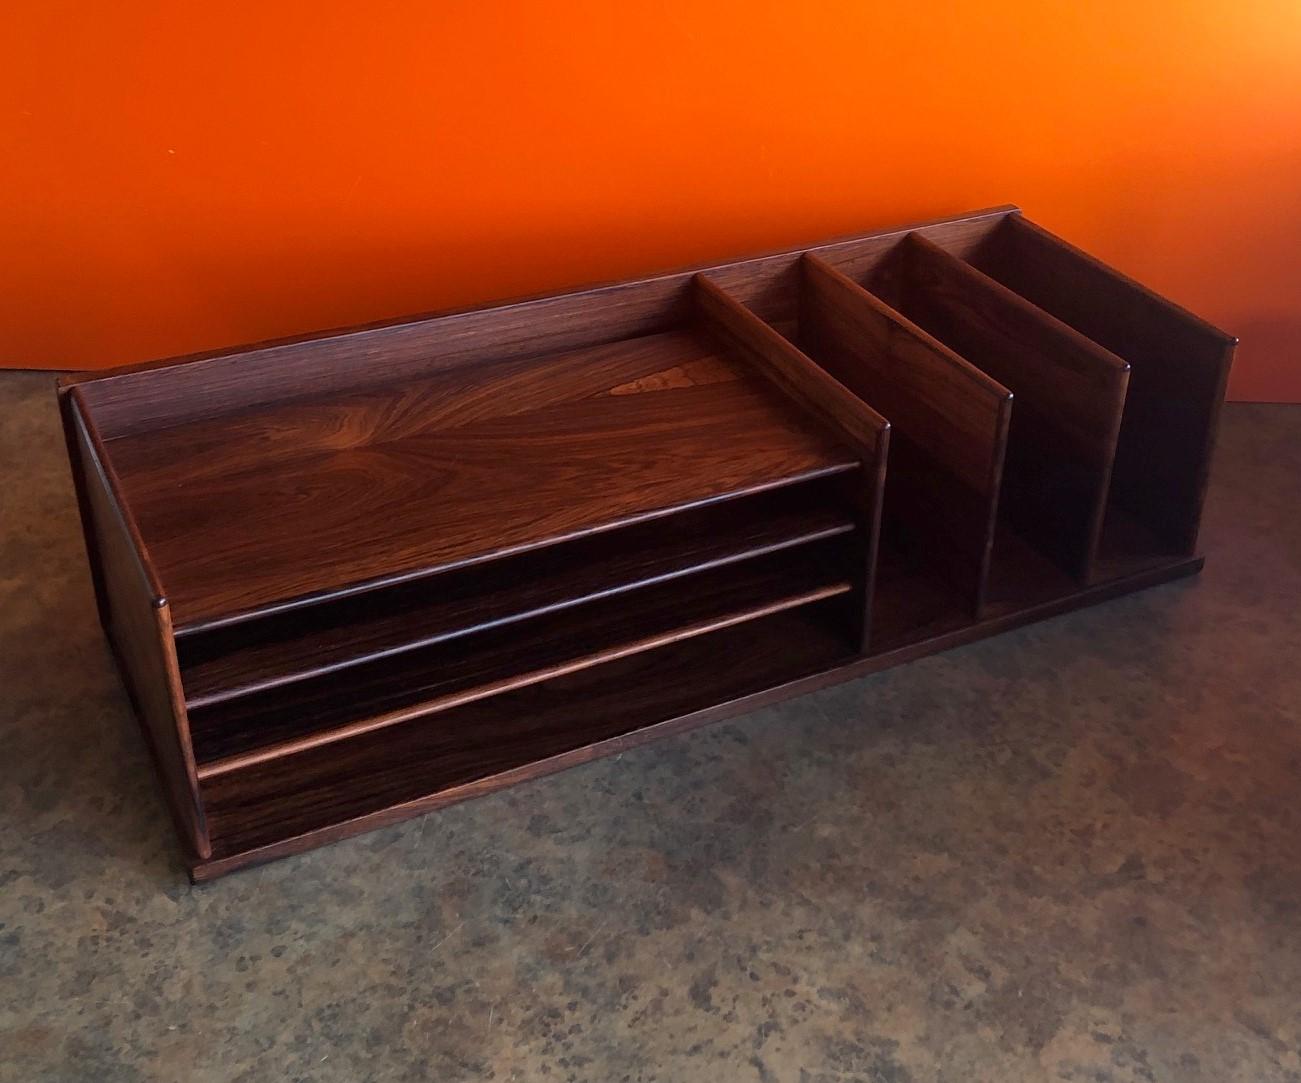 Gorgeous and very functional Danish modern rosewood desk organizer / letter tray by Georg Petersens, circa 1960s. The piece is in excellent condition and measures 23.5